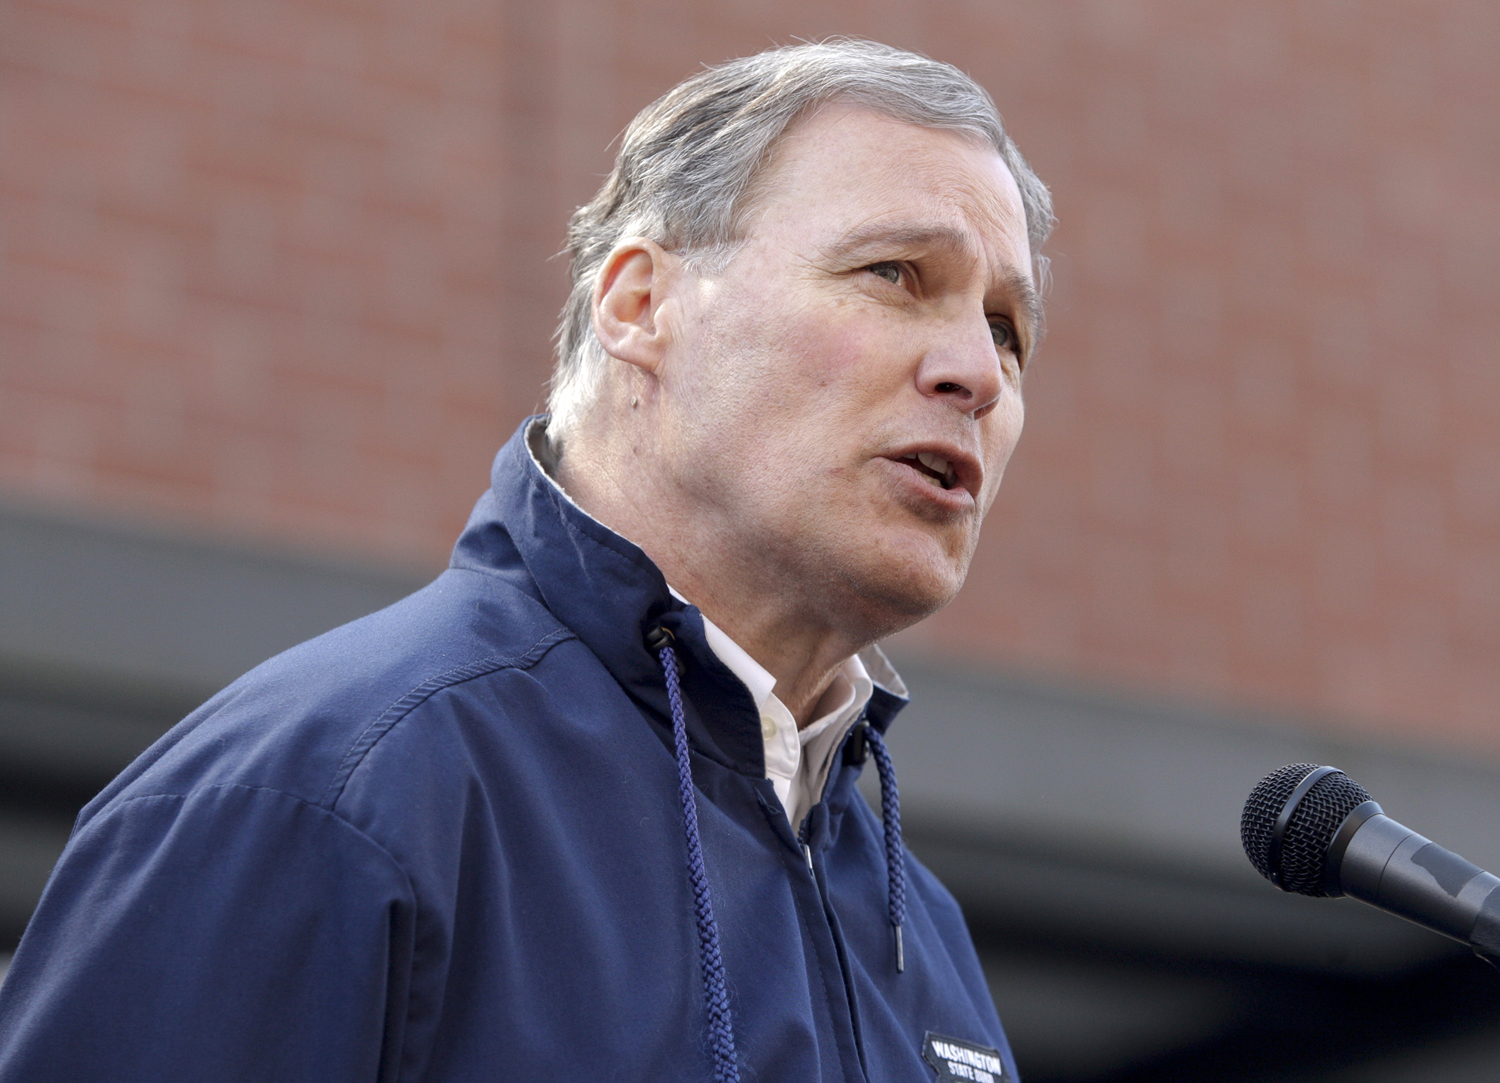 Washington Governor Jay Inslee wrote President Barack Obama on Tuesday to ask for more federal assistance for his disaster struck state. (JASON REDMOND - Reuters)